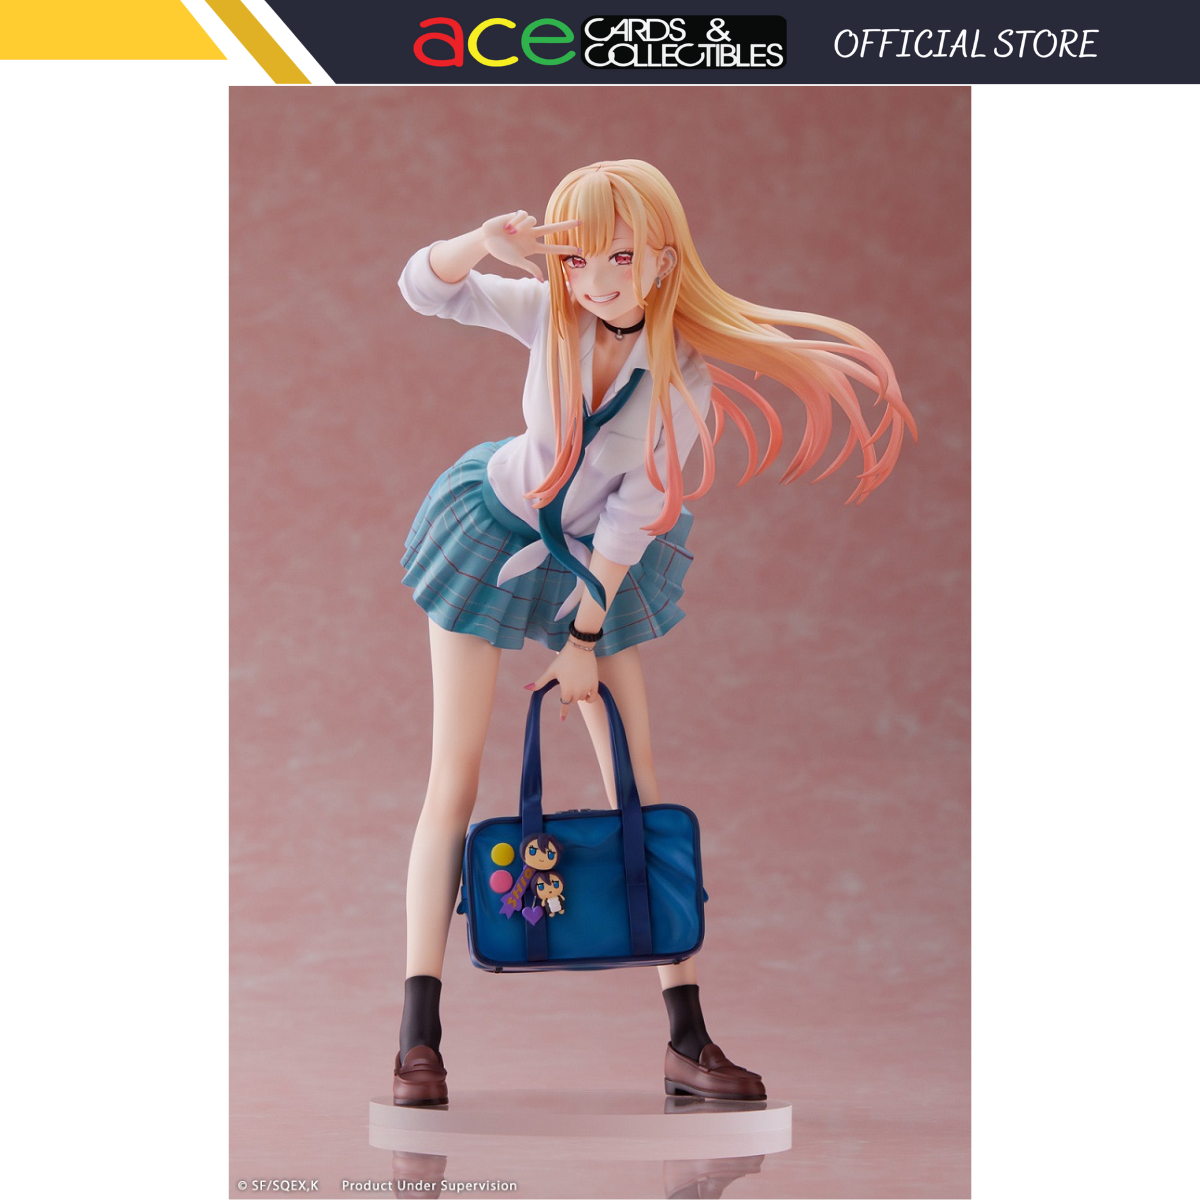 Aniplex+ My Dress-Up Darling 1/7 Scale Figure "Marin Kitagawa"-Aniplex+-Ace Cards & Collectibles